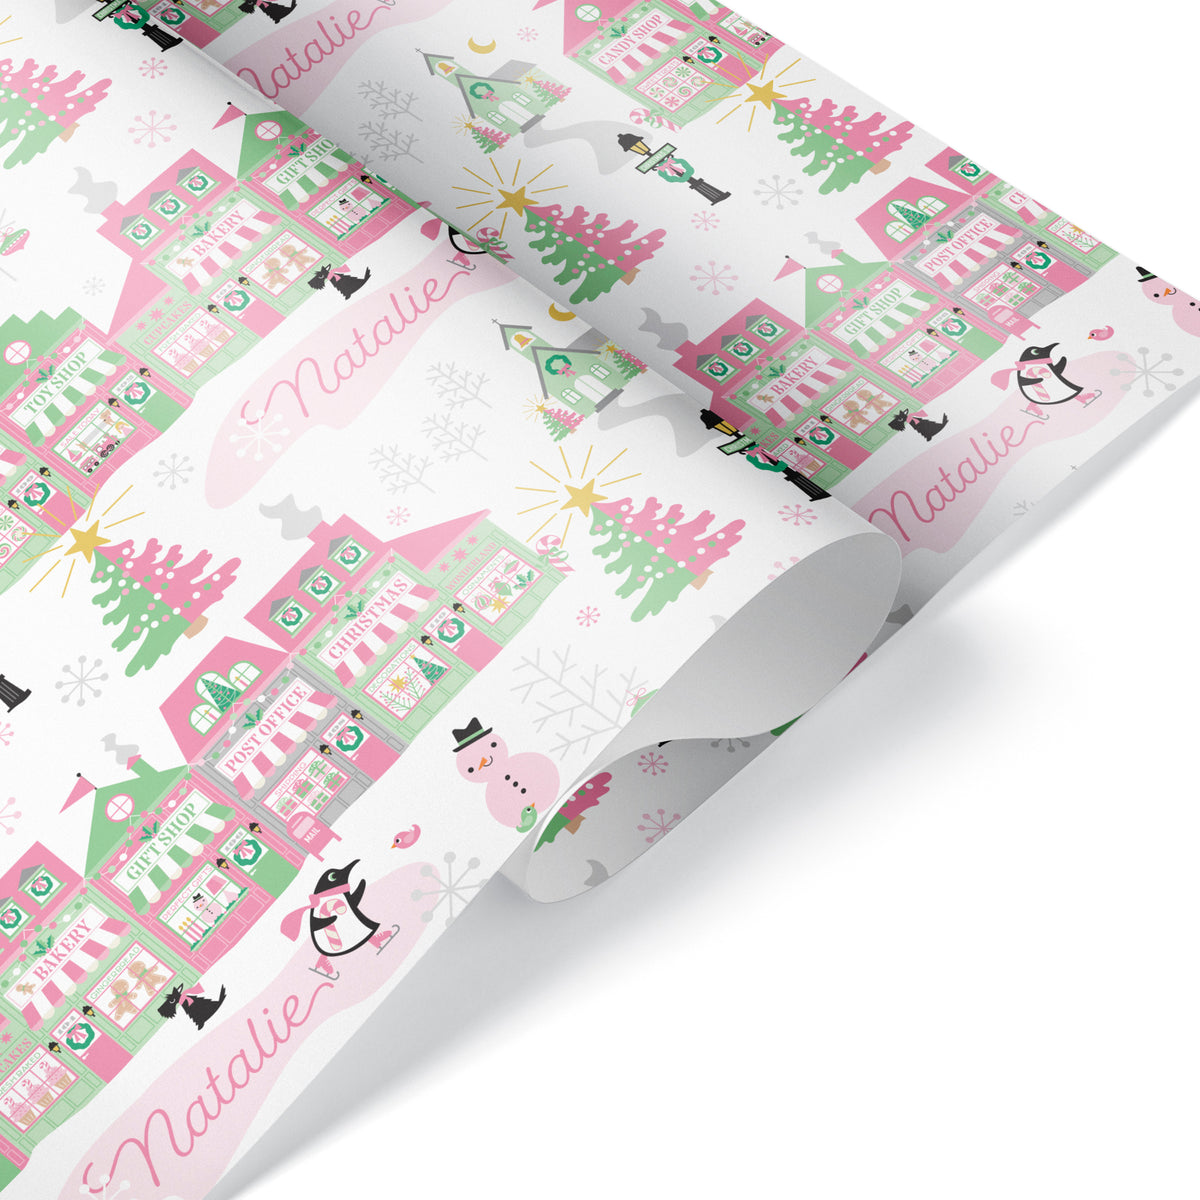 Pastel Christmas Village Personalized Wrapping Paper - PINK